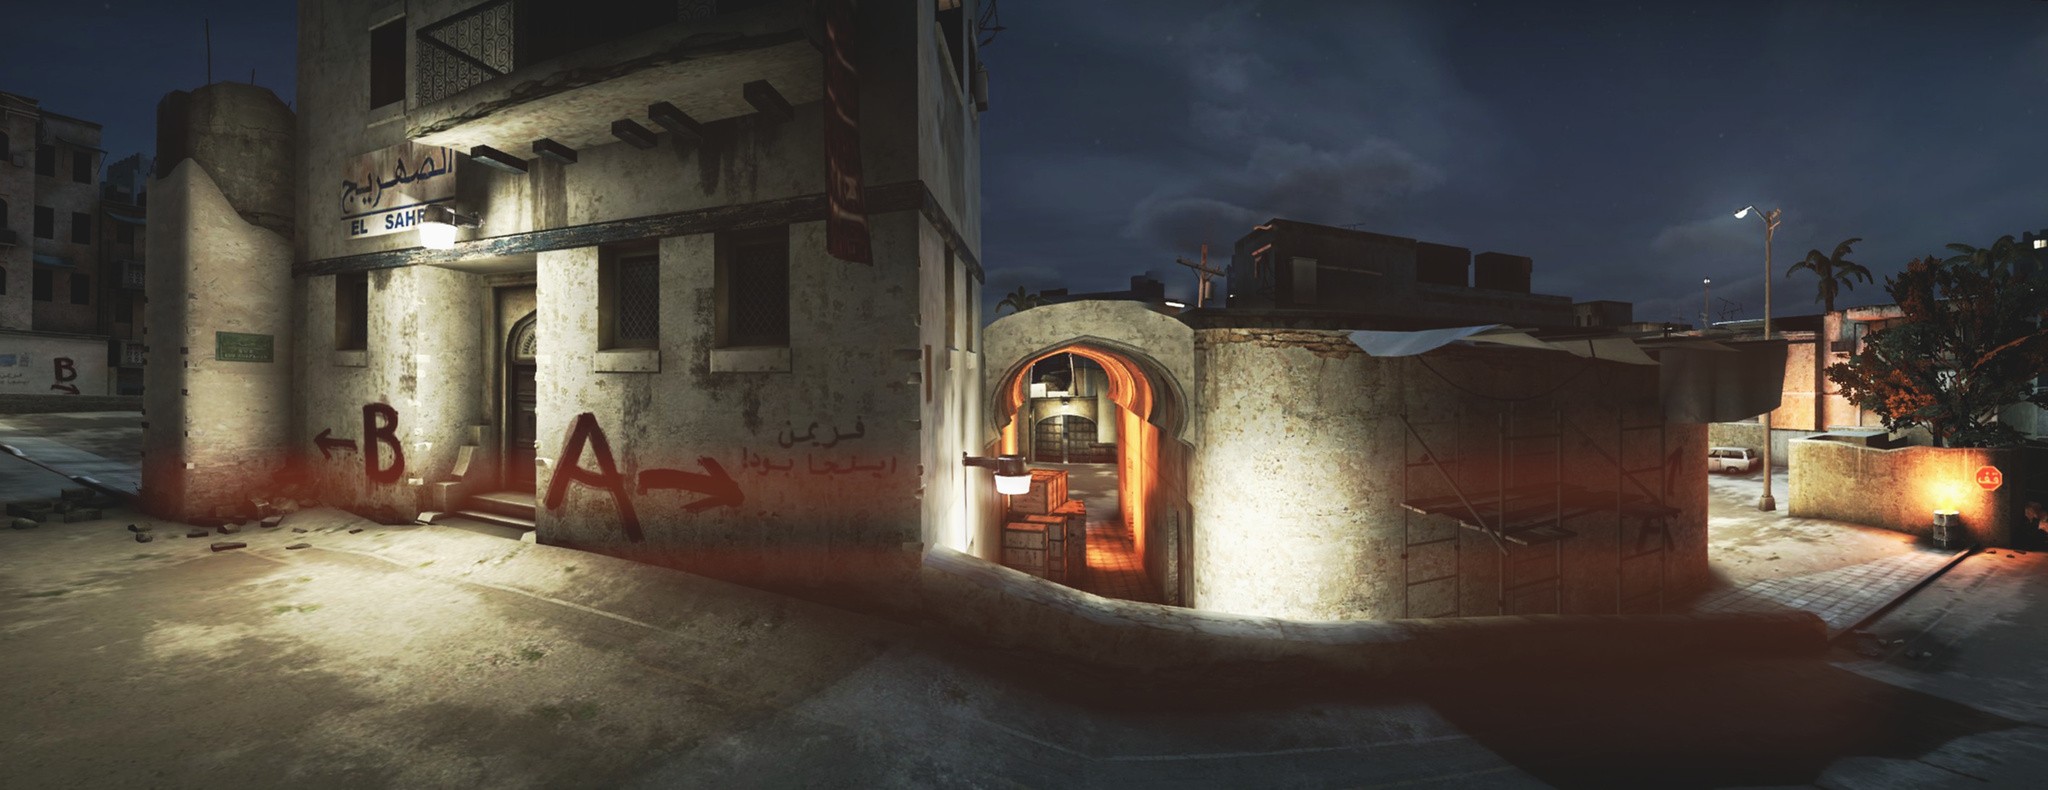 General 2048x790 dust2 Counter-Strike Counter-Strike: Global Offensive Counter-Strike: Source screen shot desert town night Middle East video games PC gaming